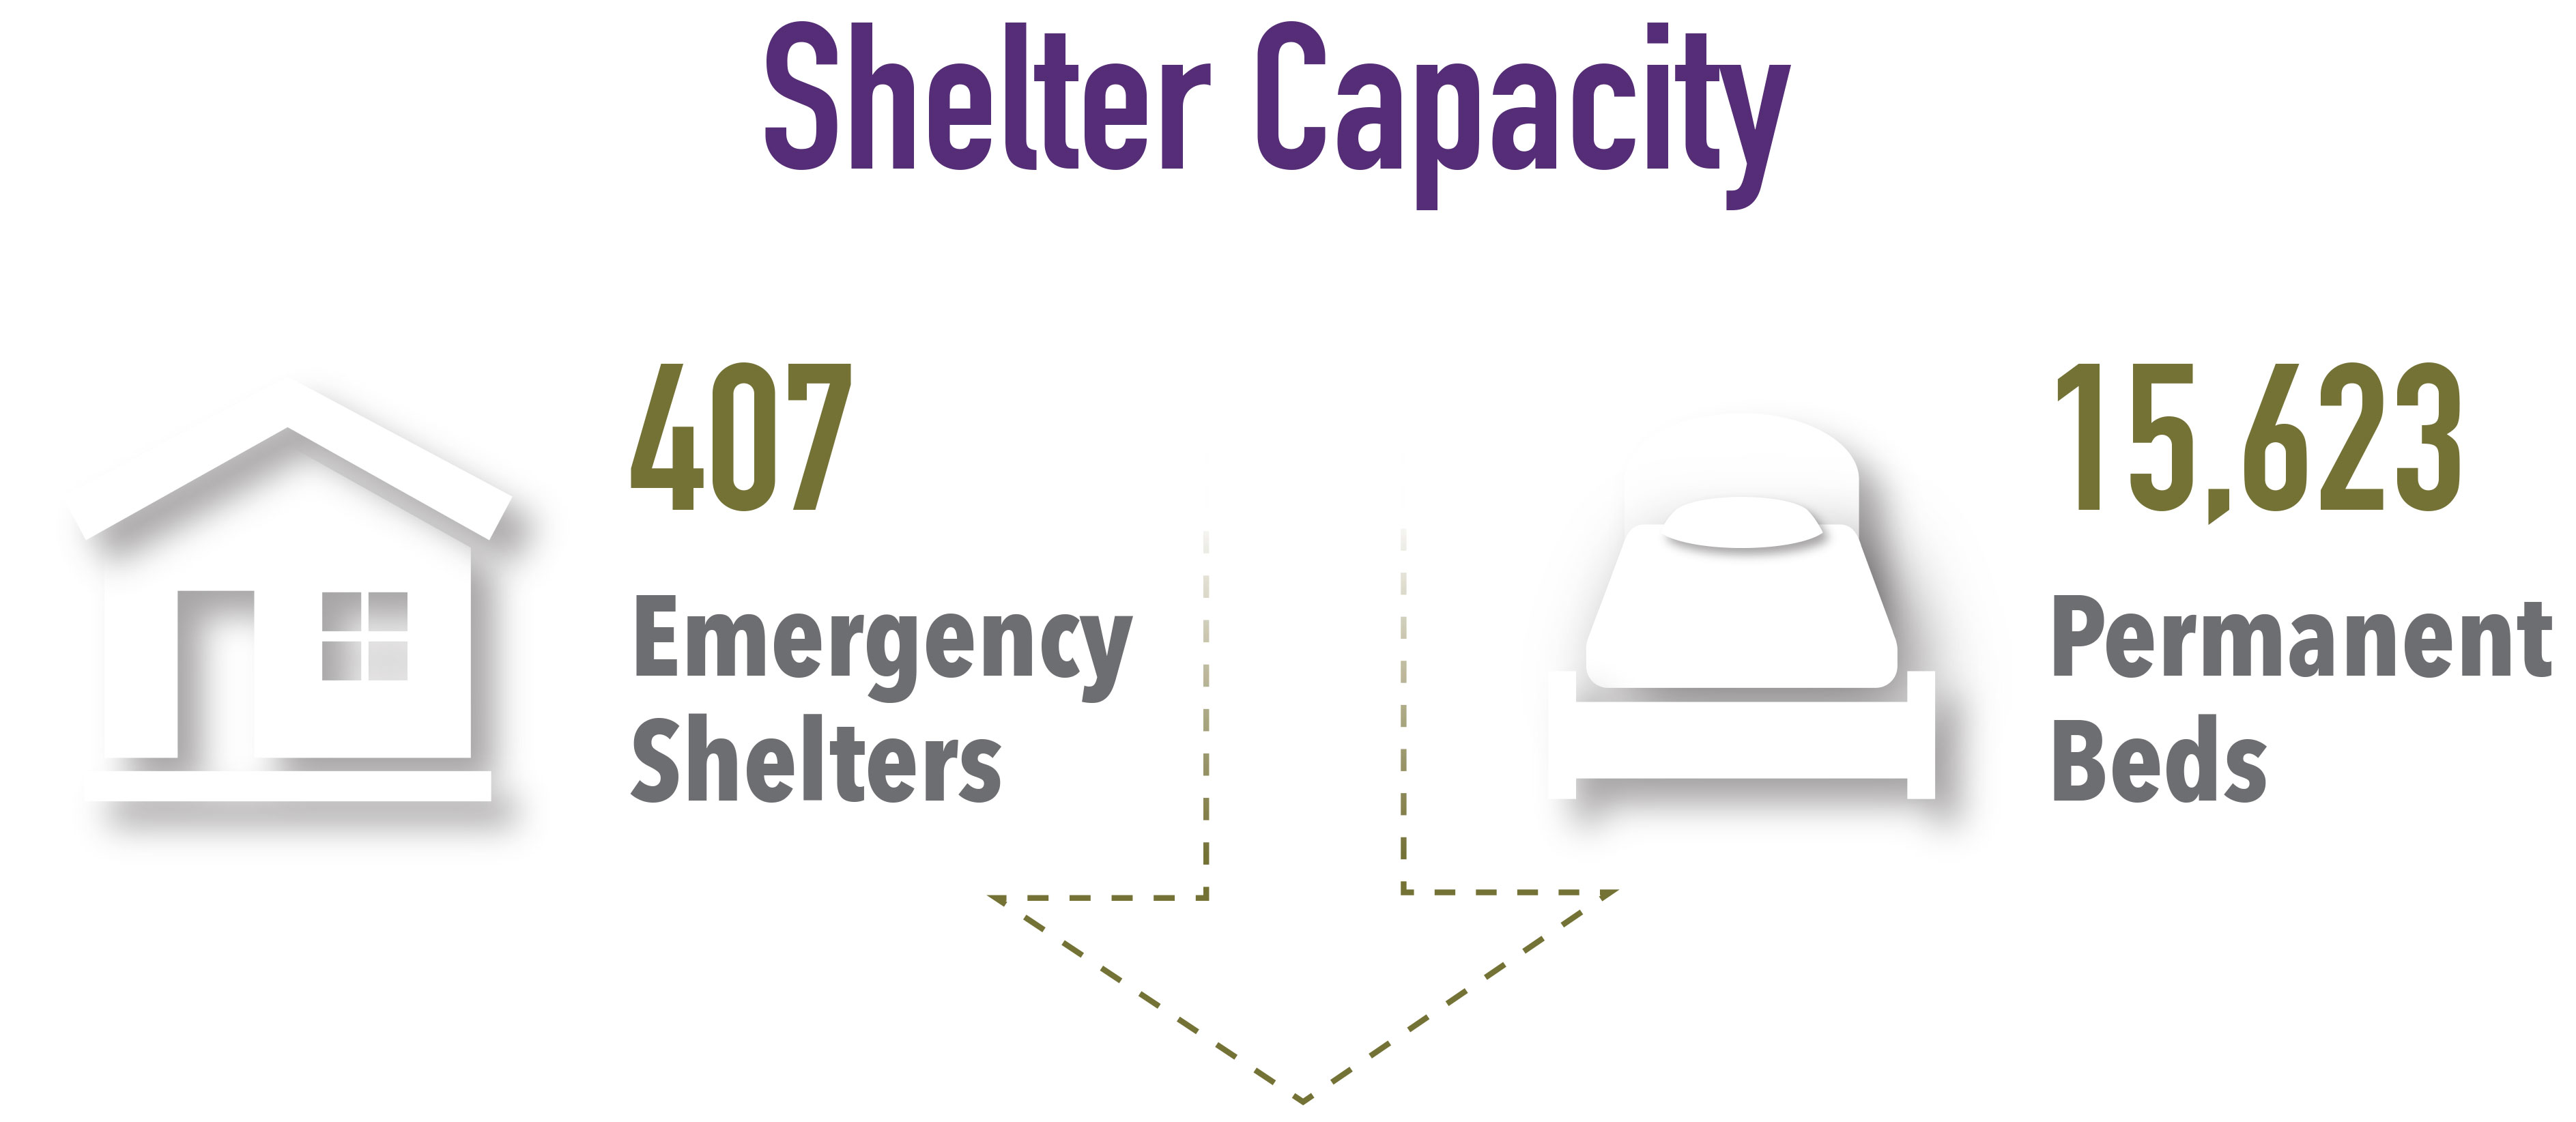 Total number of emergency shelters and permanent shelter beds in Canada.